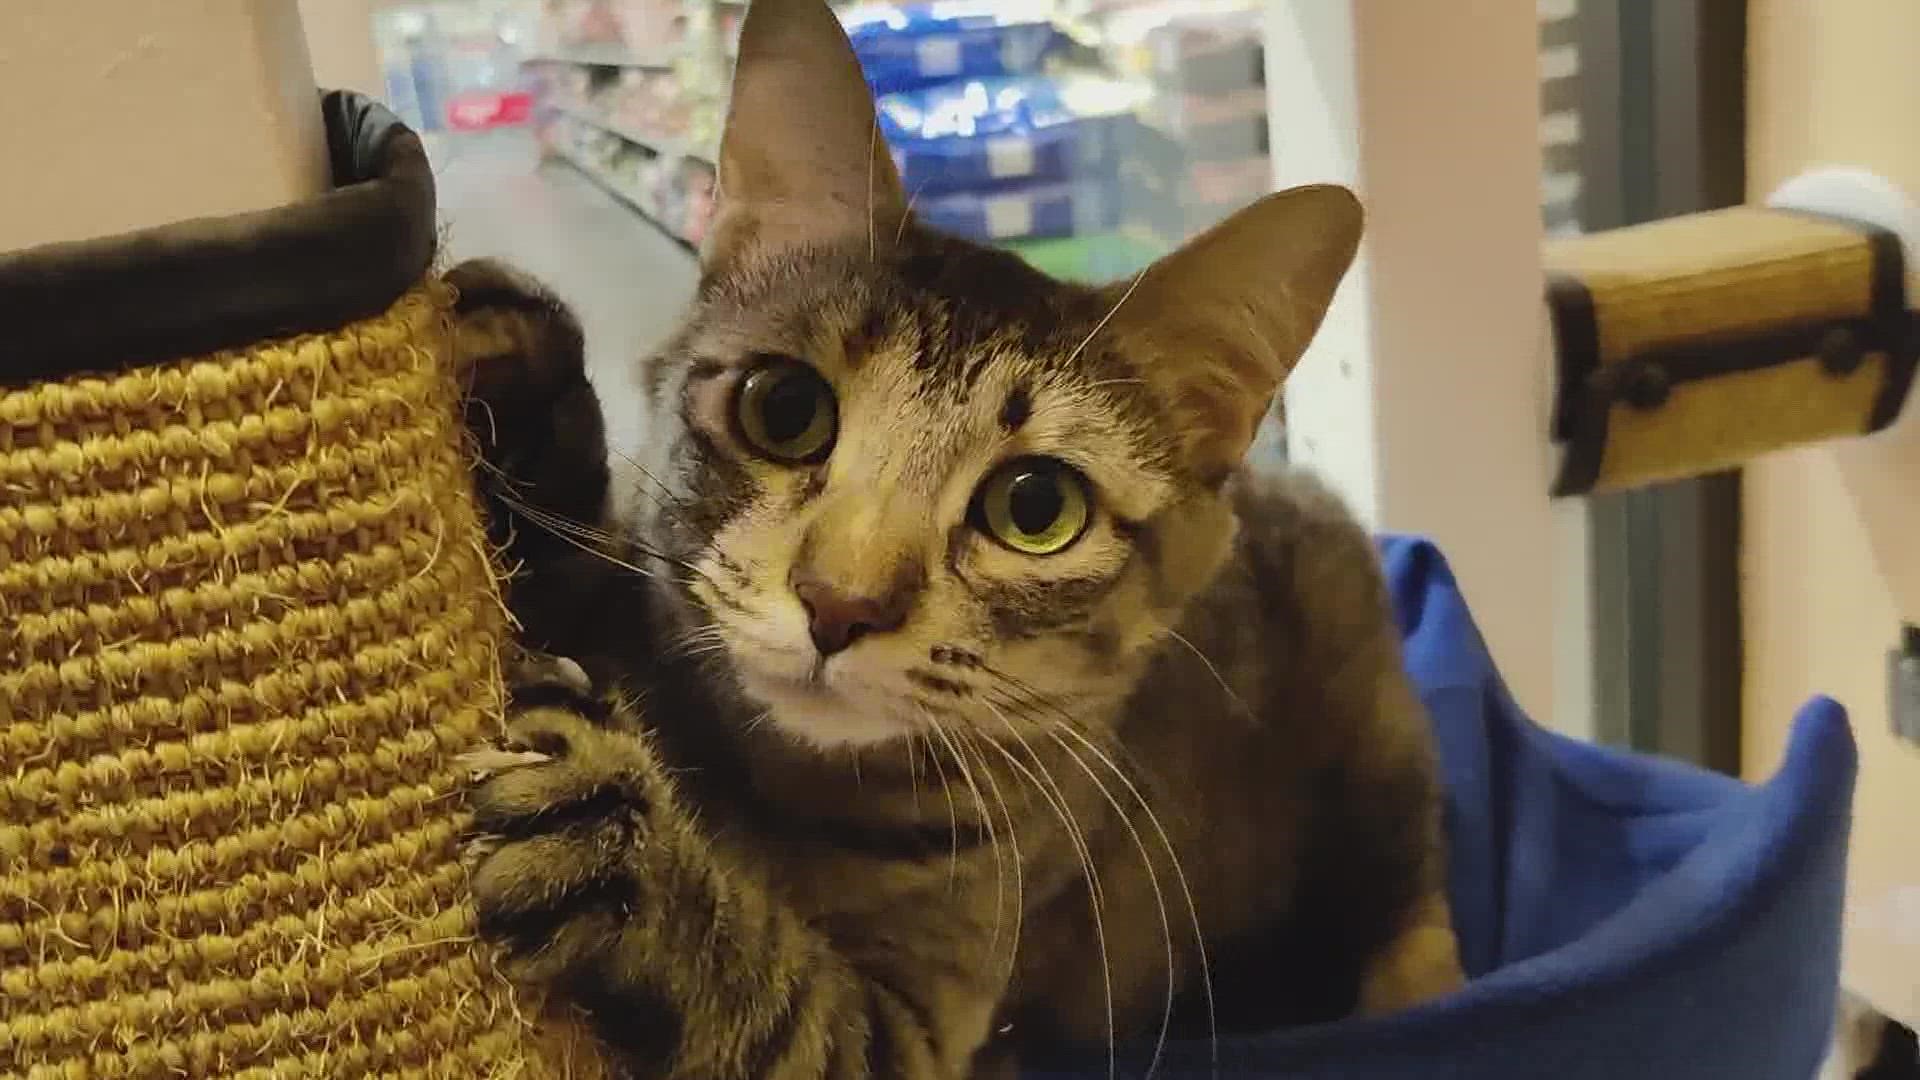 Olive is a sweet girl who will run up to you and ask for pets when you call her name.